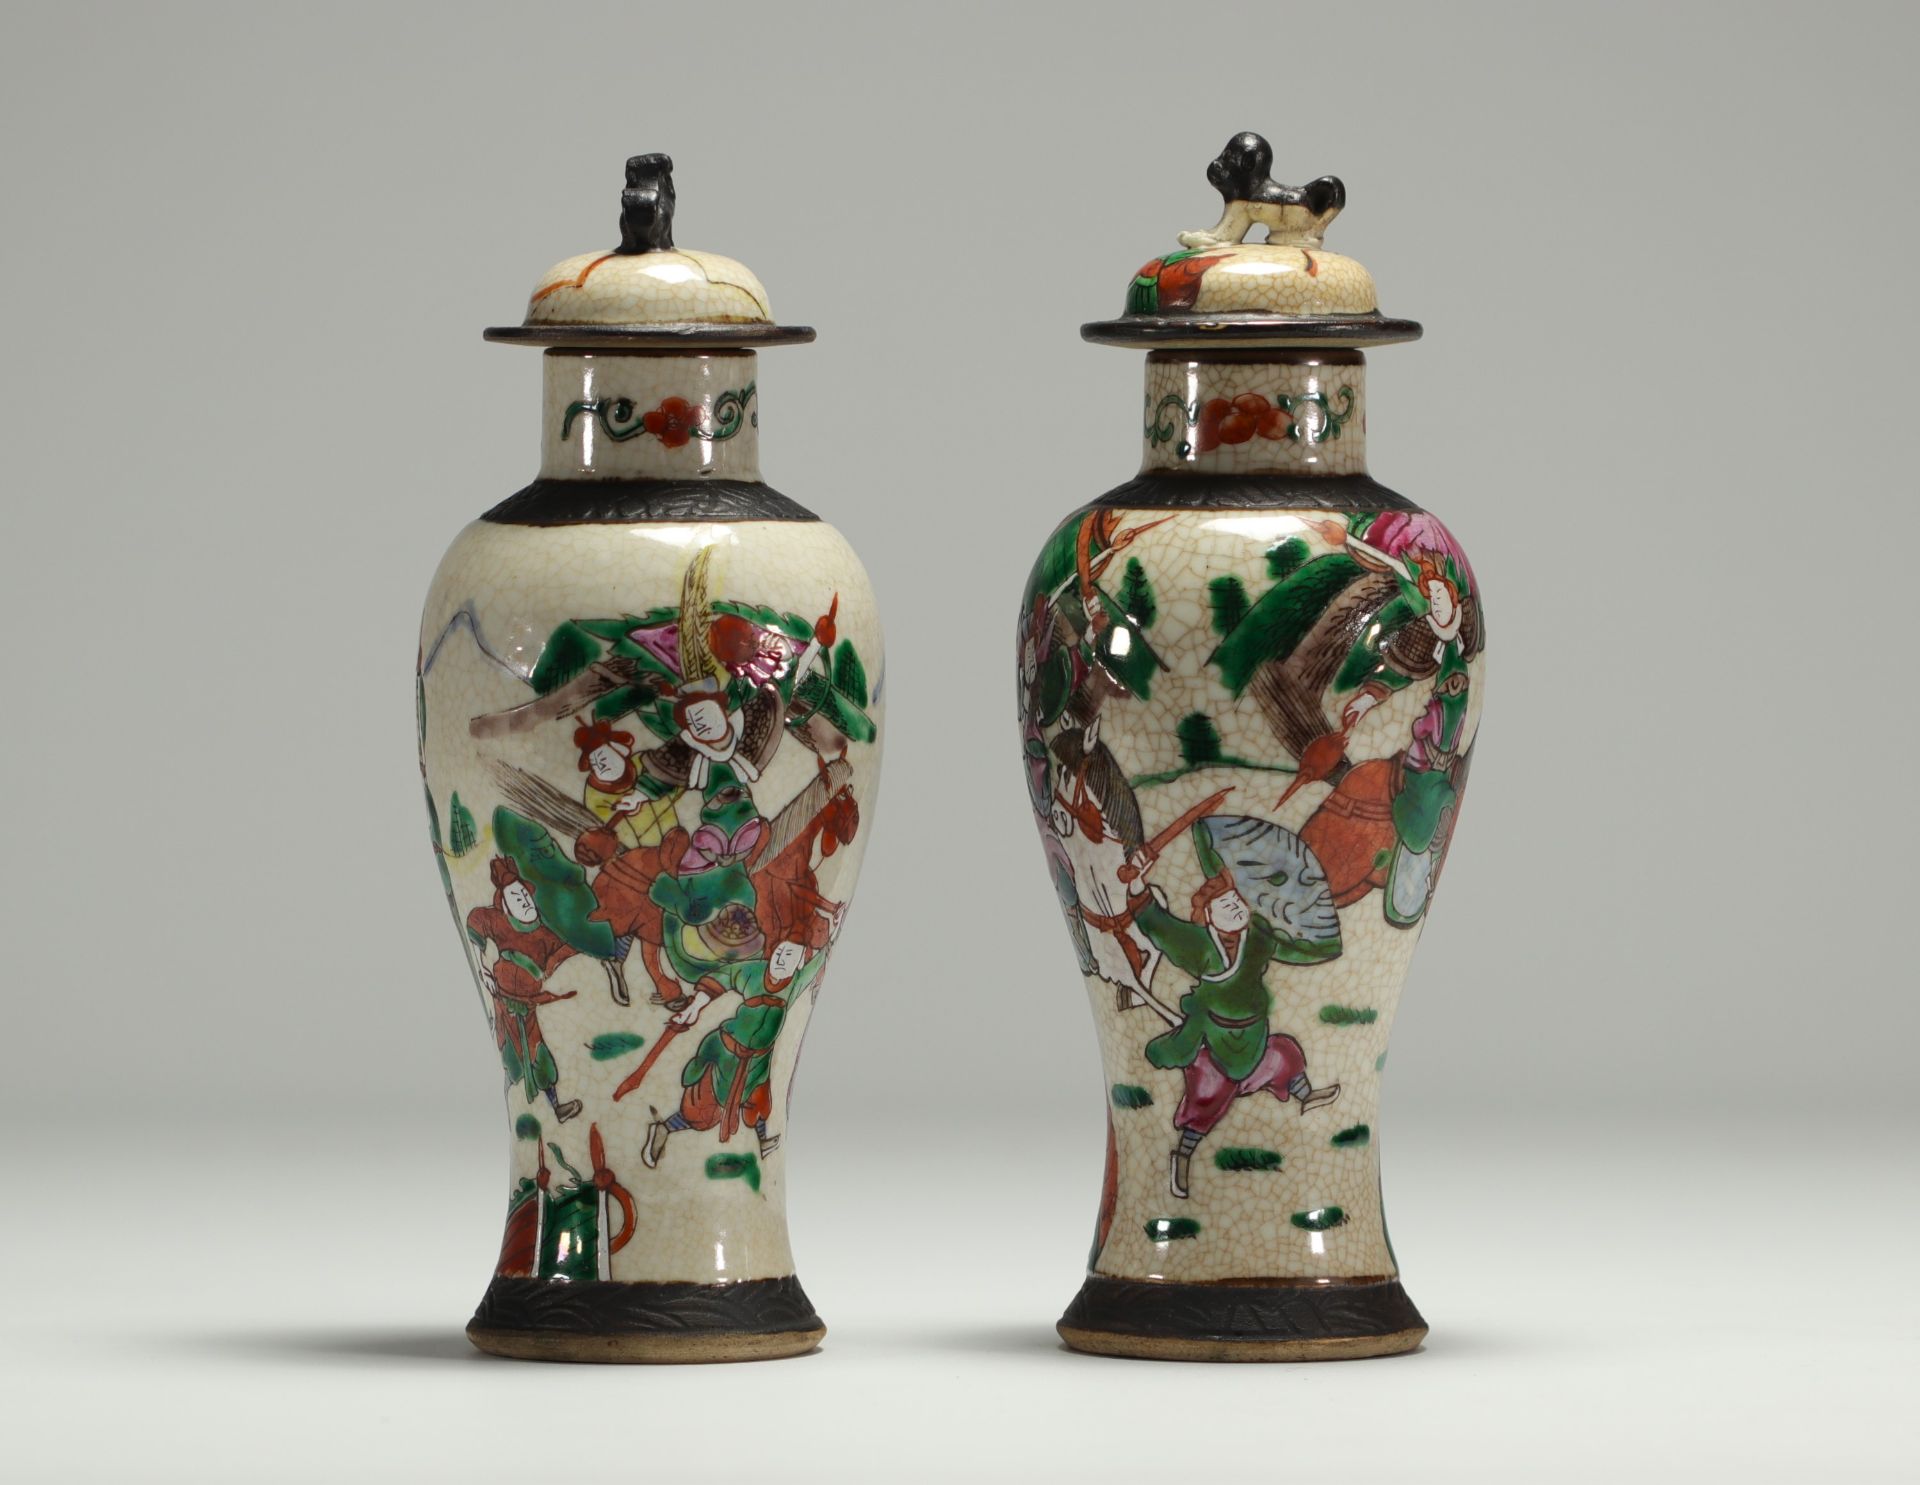 China - Pair of covered vases in Nanjing porcelain decorated with figures. - Image 2 of 3